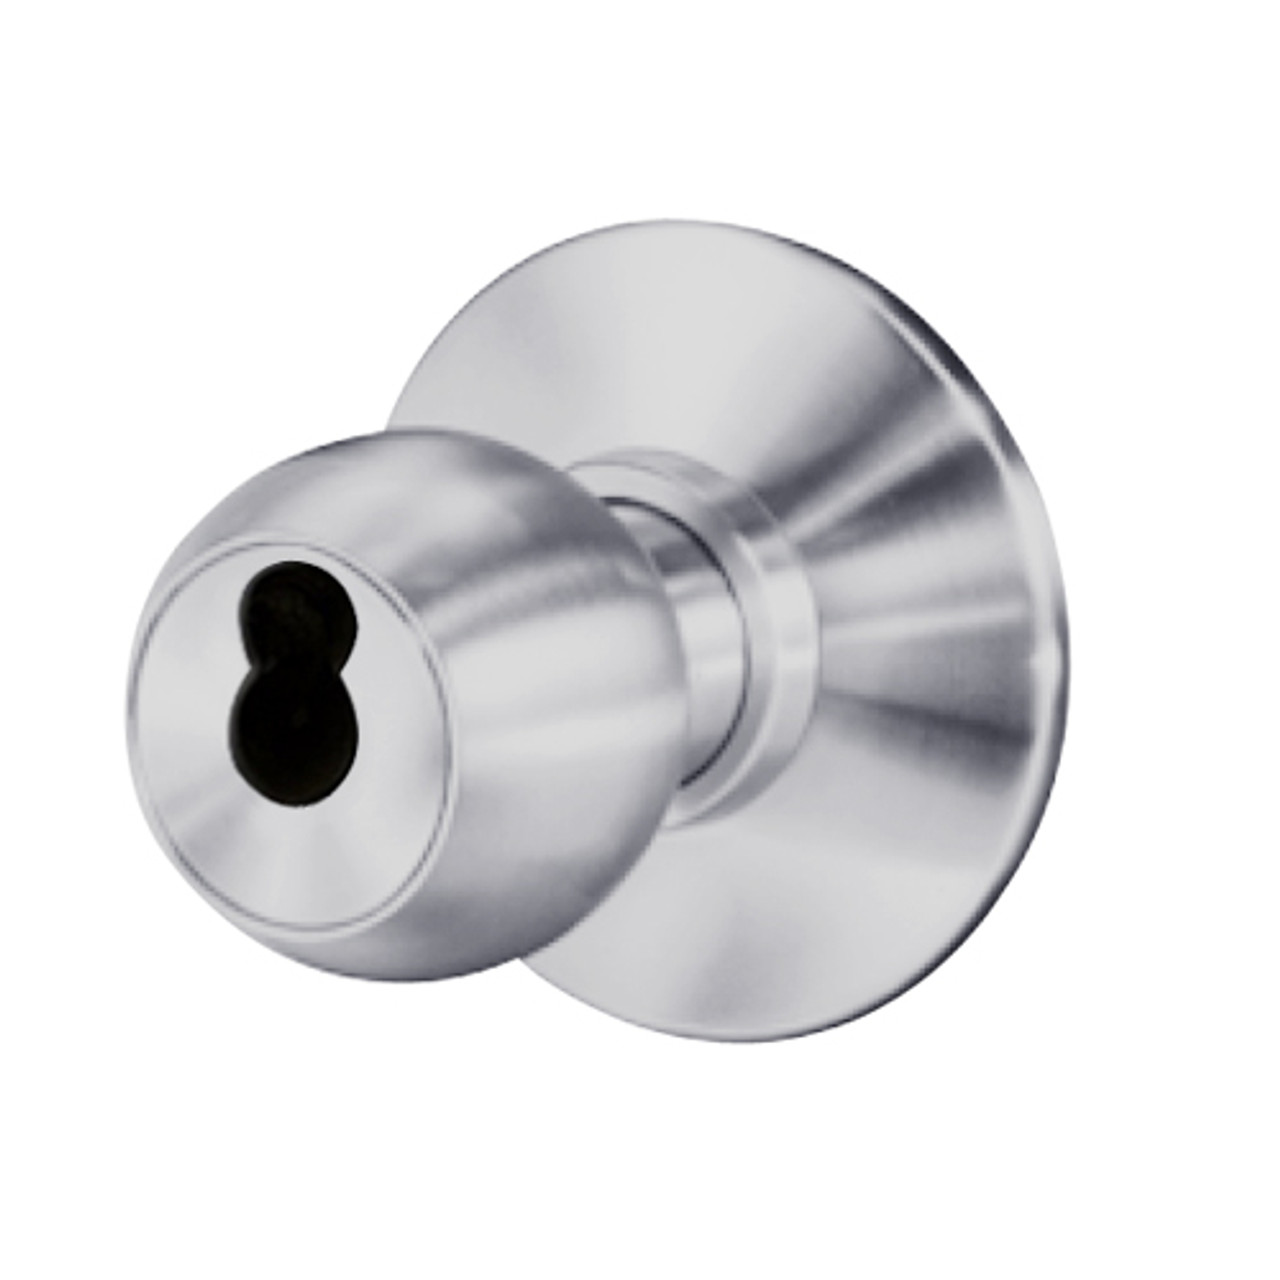 8K47YR4DS3626 Best 8K Series Exit Heavy Duty Cylindrical Knob Locks with Round Style in Satin Chrome